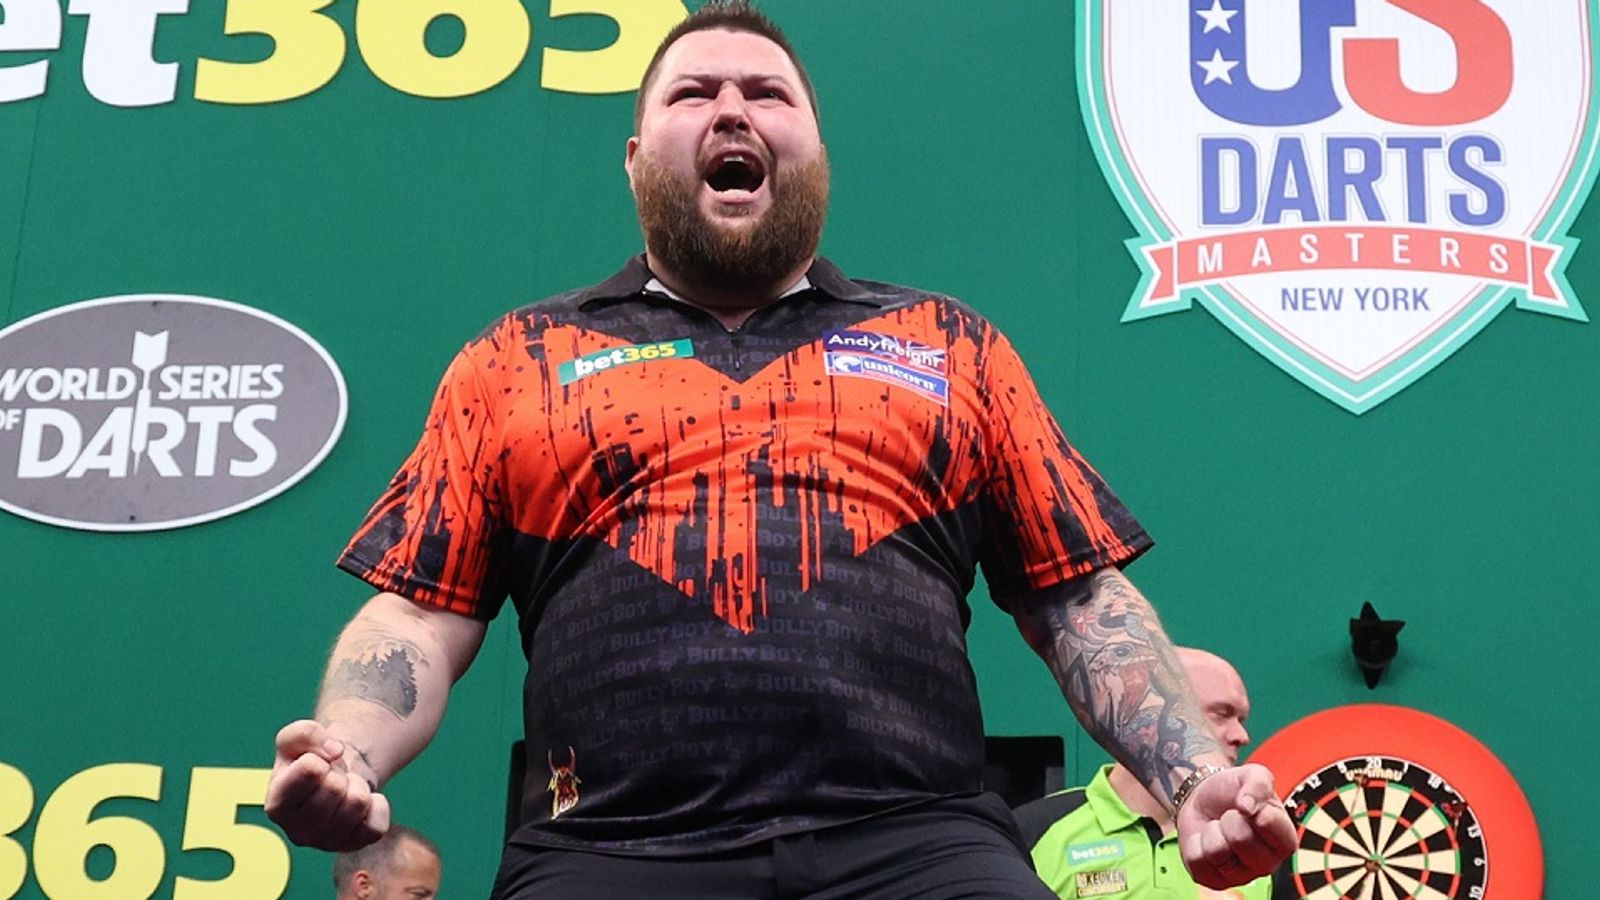 US Darts Masters: Michael Smith proves too good for Michael van Gerwen at Madison Square Garden